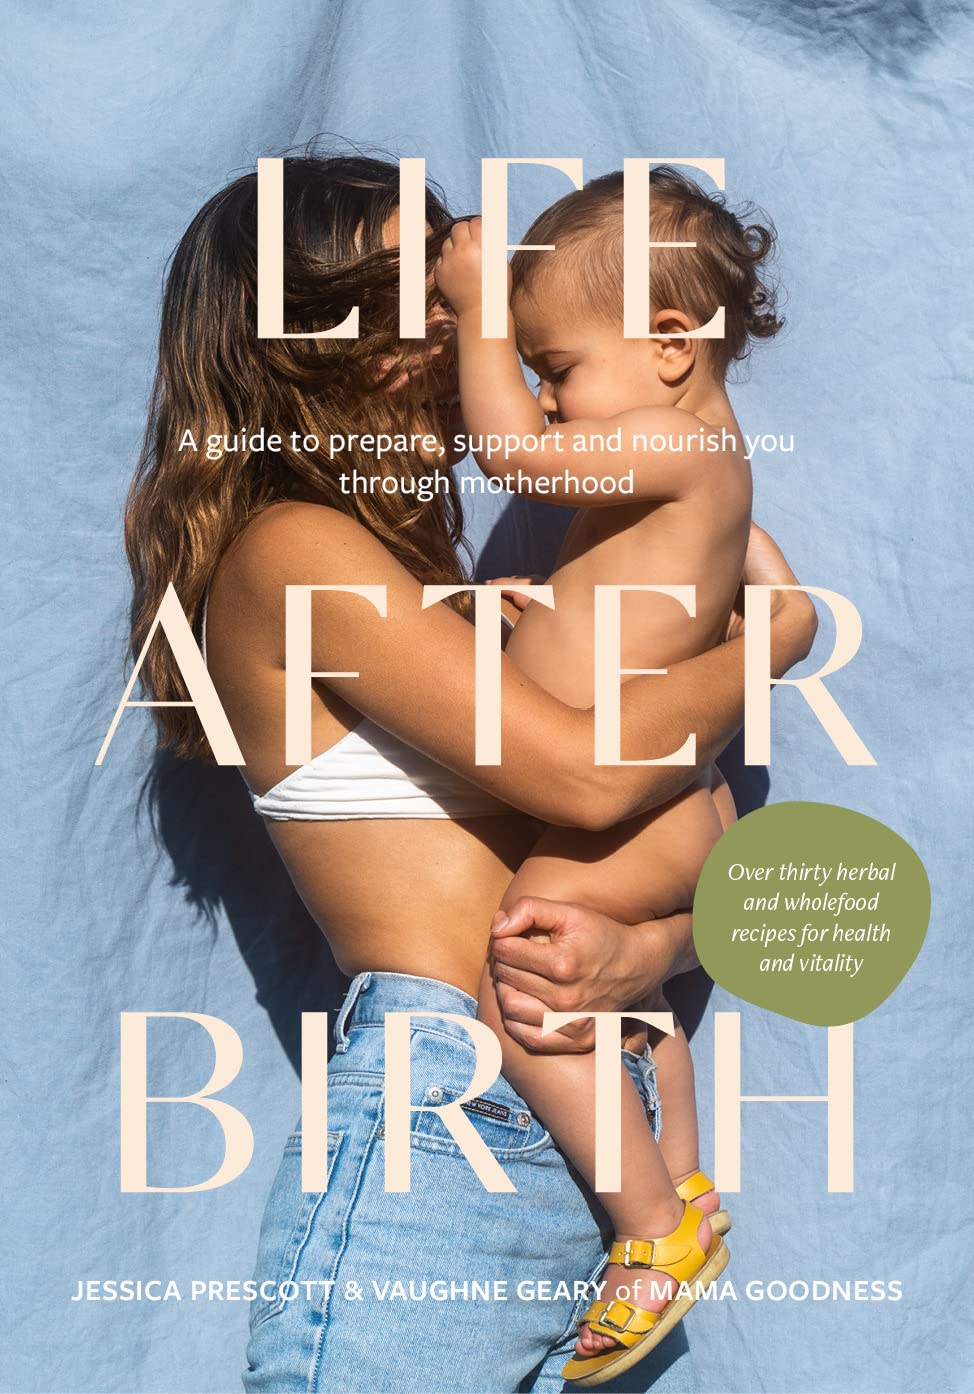 rizzoli life after birth the book christmas gift for a girl who is new mom